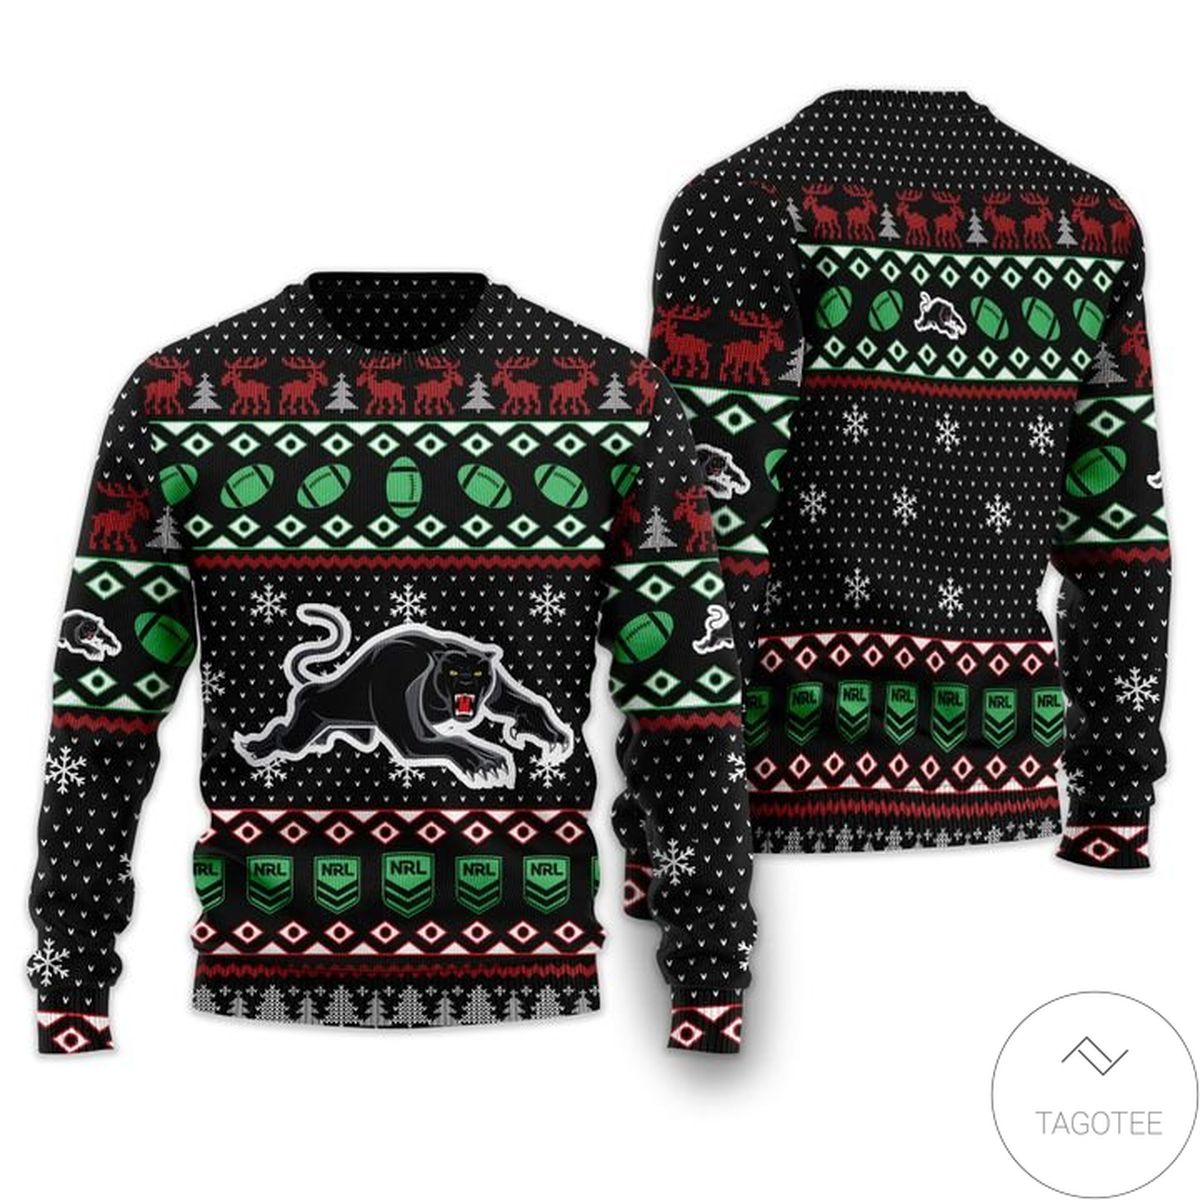 Penrith Panthers Ugly Christmas Sweater